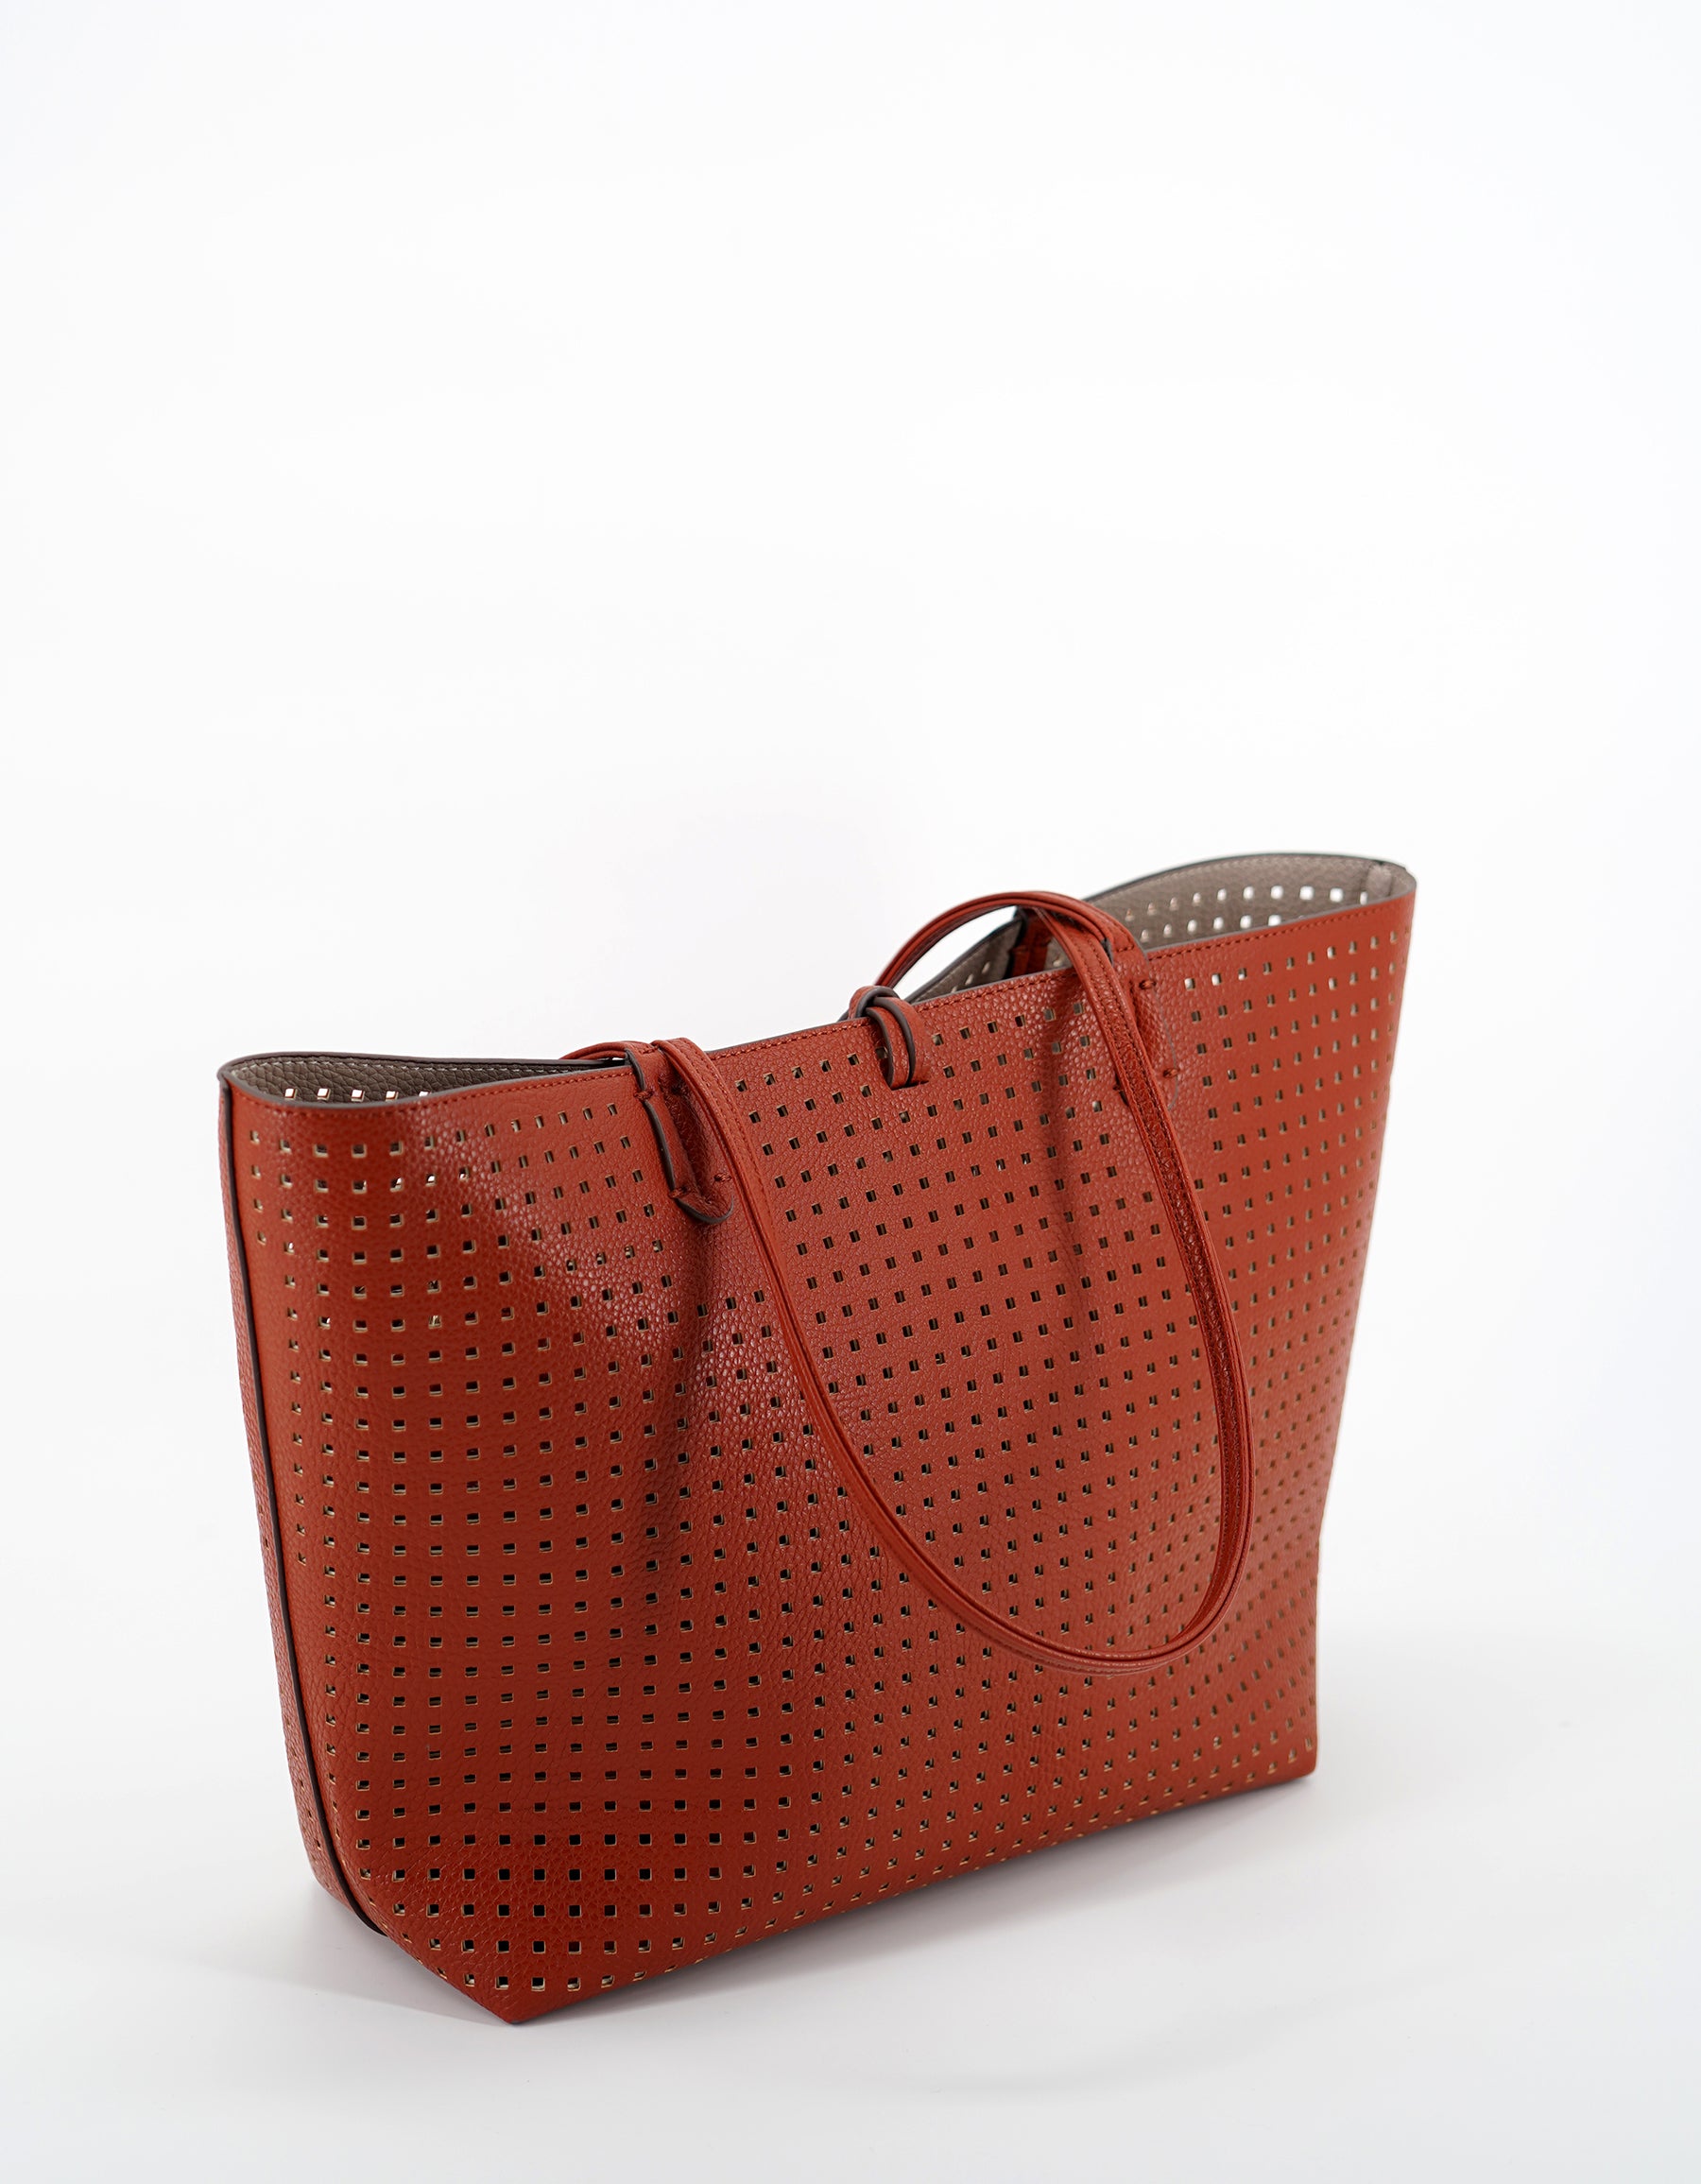 DEPARTURE TOTE PERFORATED SQUARE BURNT TERRACOTTA/PUTTY